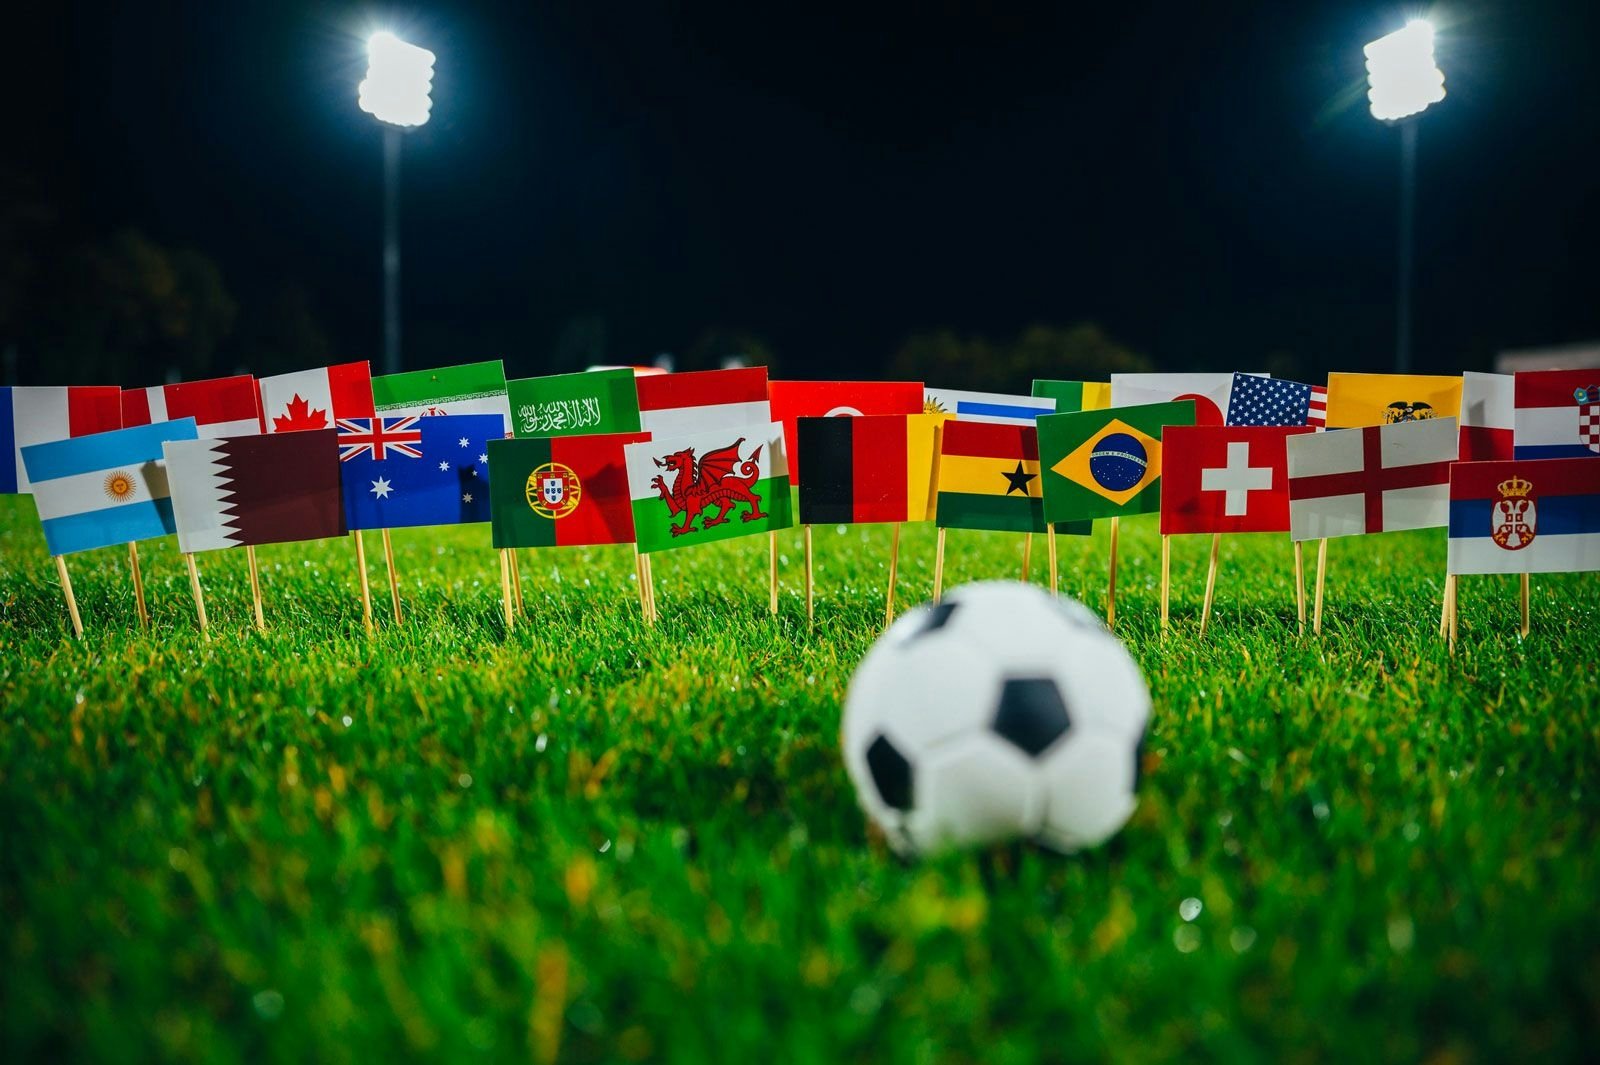 World Cup image of a football in front of world flags on a pitch